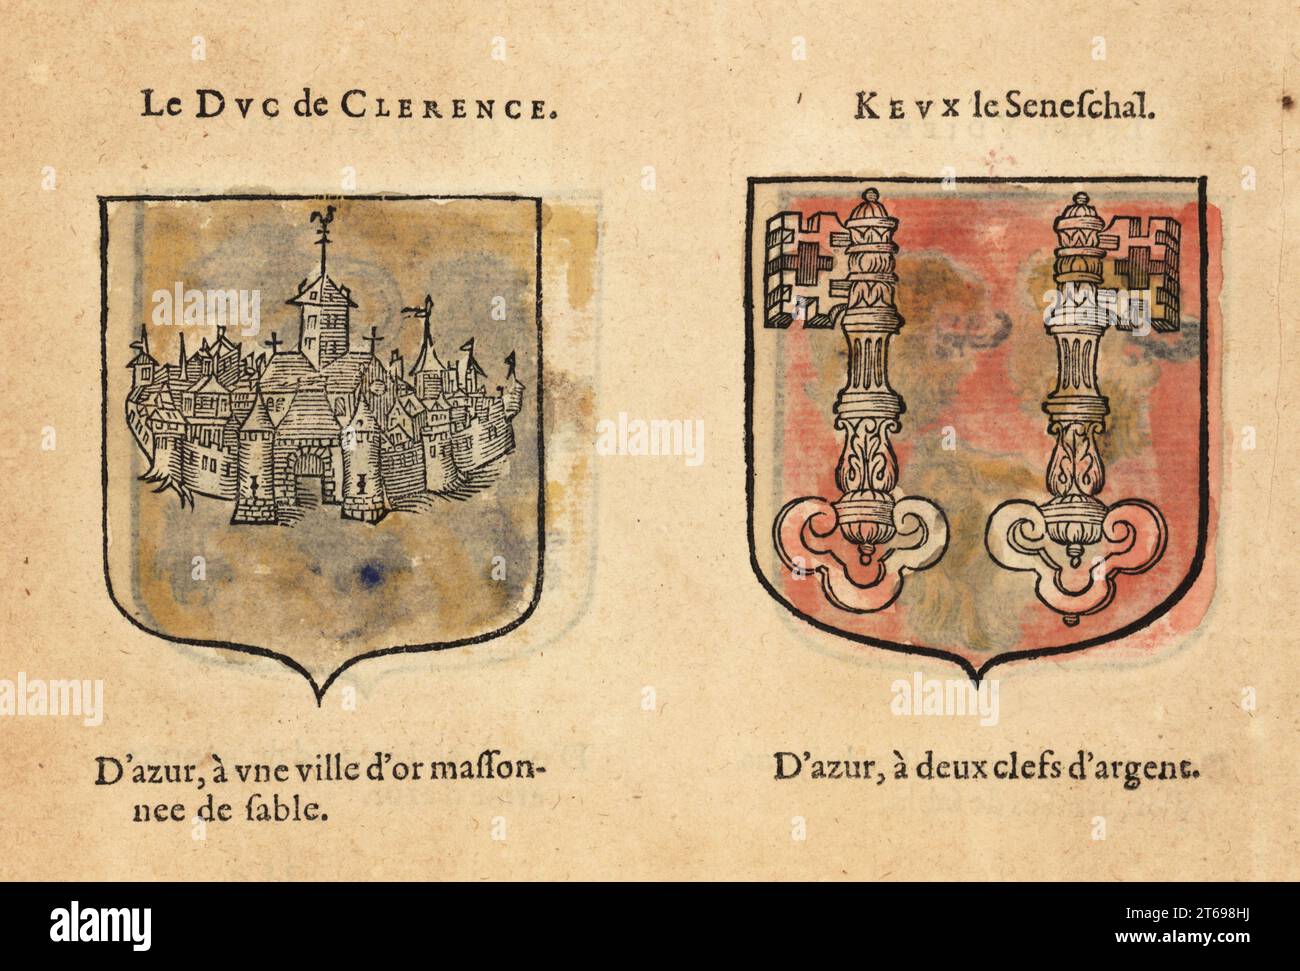 Imaginary coats of arms of King Arthurs Knights of the Round Table: Galeschin, Duke of Clarence, with golden town, and Sir Kay with silver keys. Chevaliers de la table ronde: Le DUC de CLERENCE, KEUX le Seneschal. Handcoloured woodblock engraving from Hierosme de Baras Le Blason des Armoiries, Chez Rolet Boutonne, Paris, 1628. Stock Photo